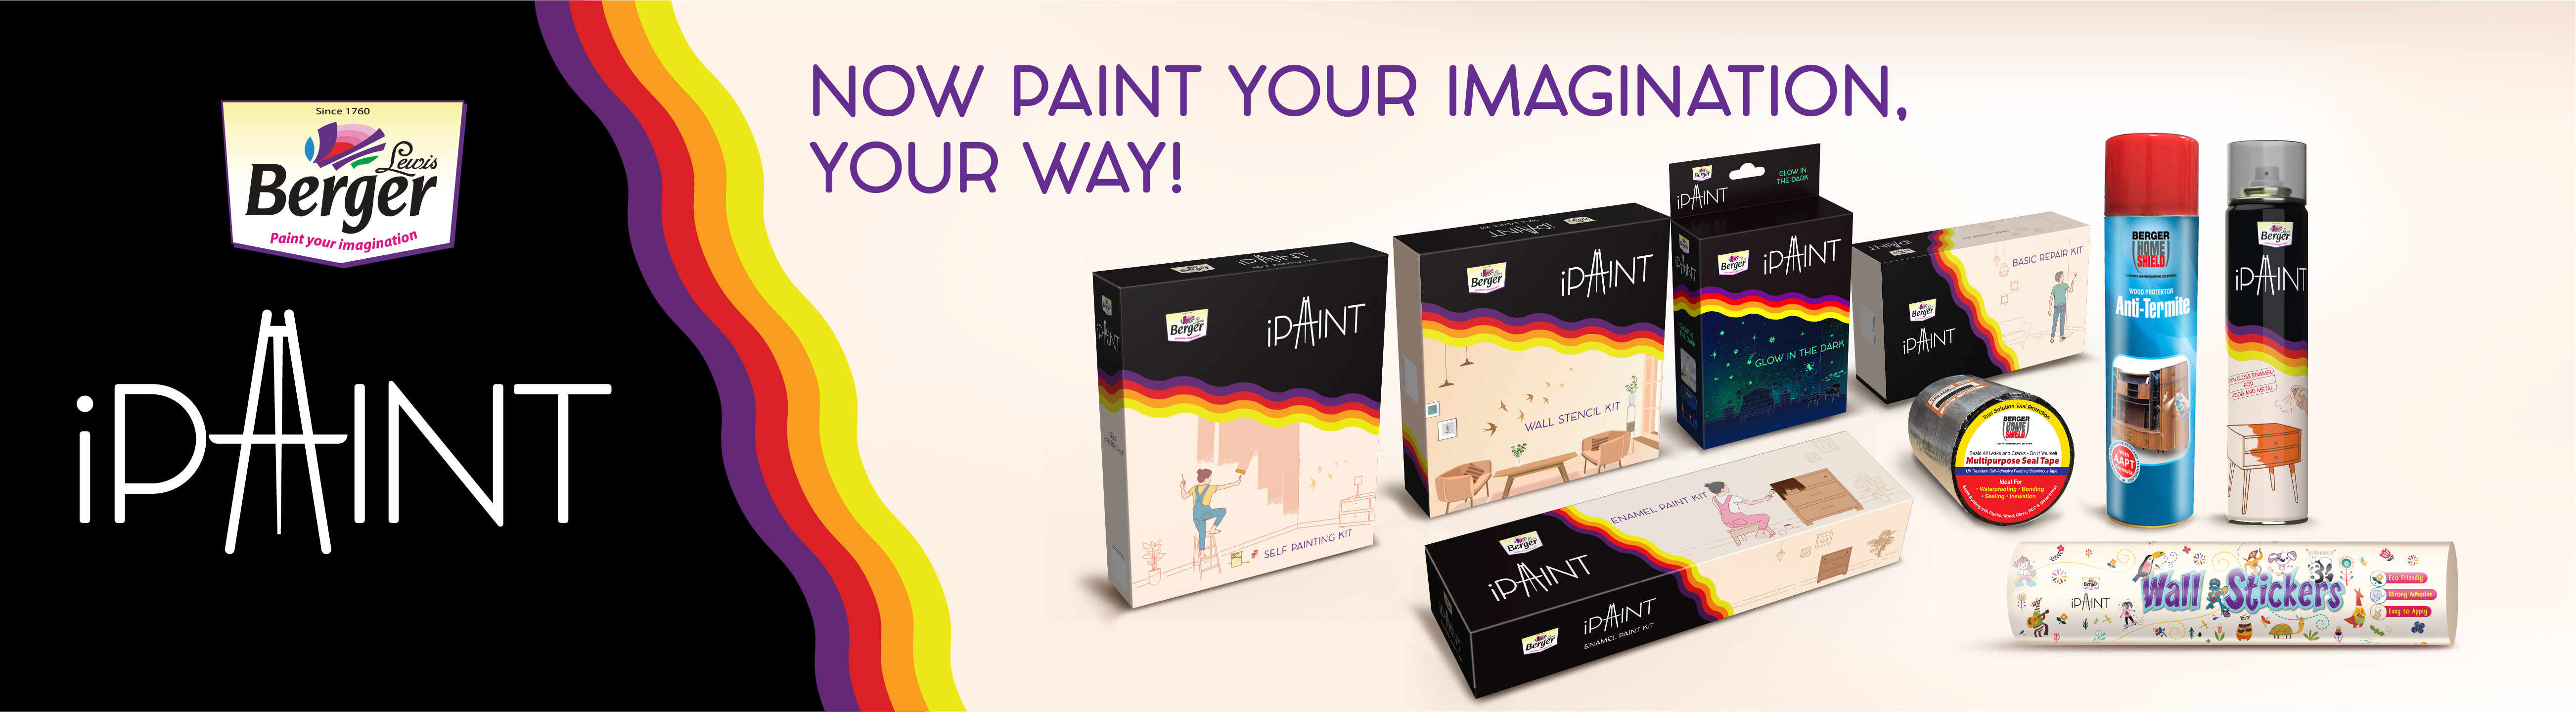 iPaint Wall Stencil Kit Banner